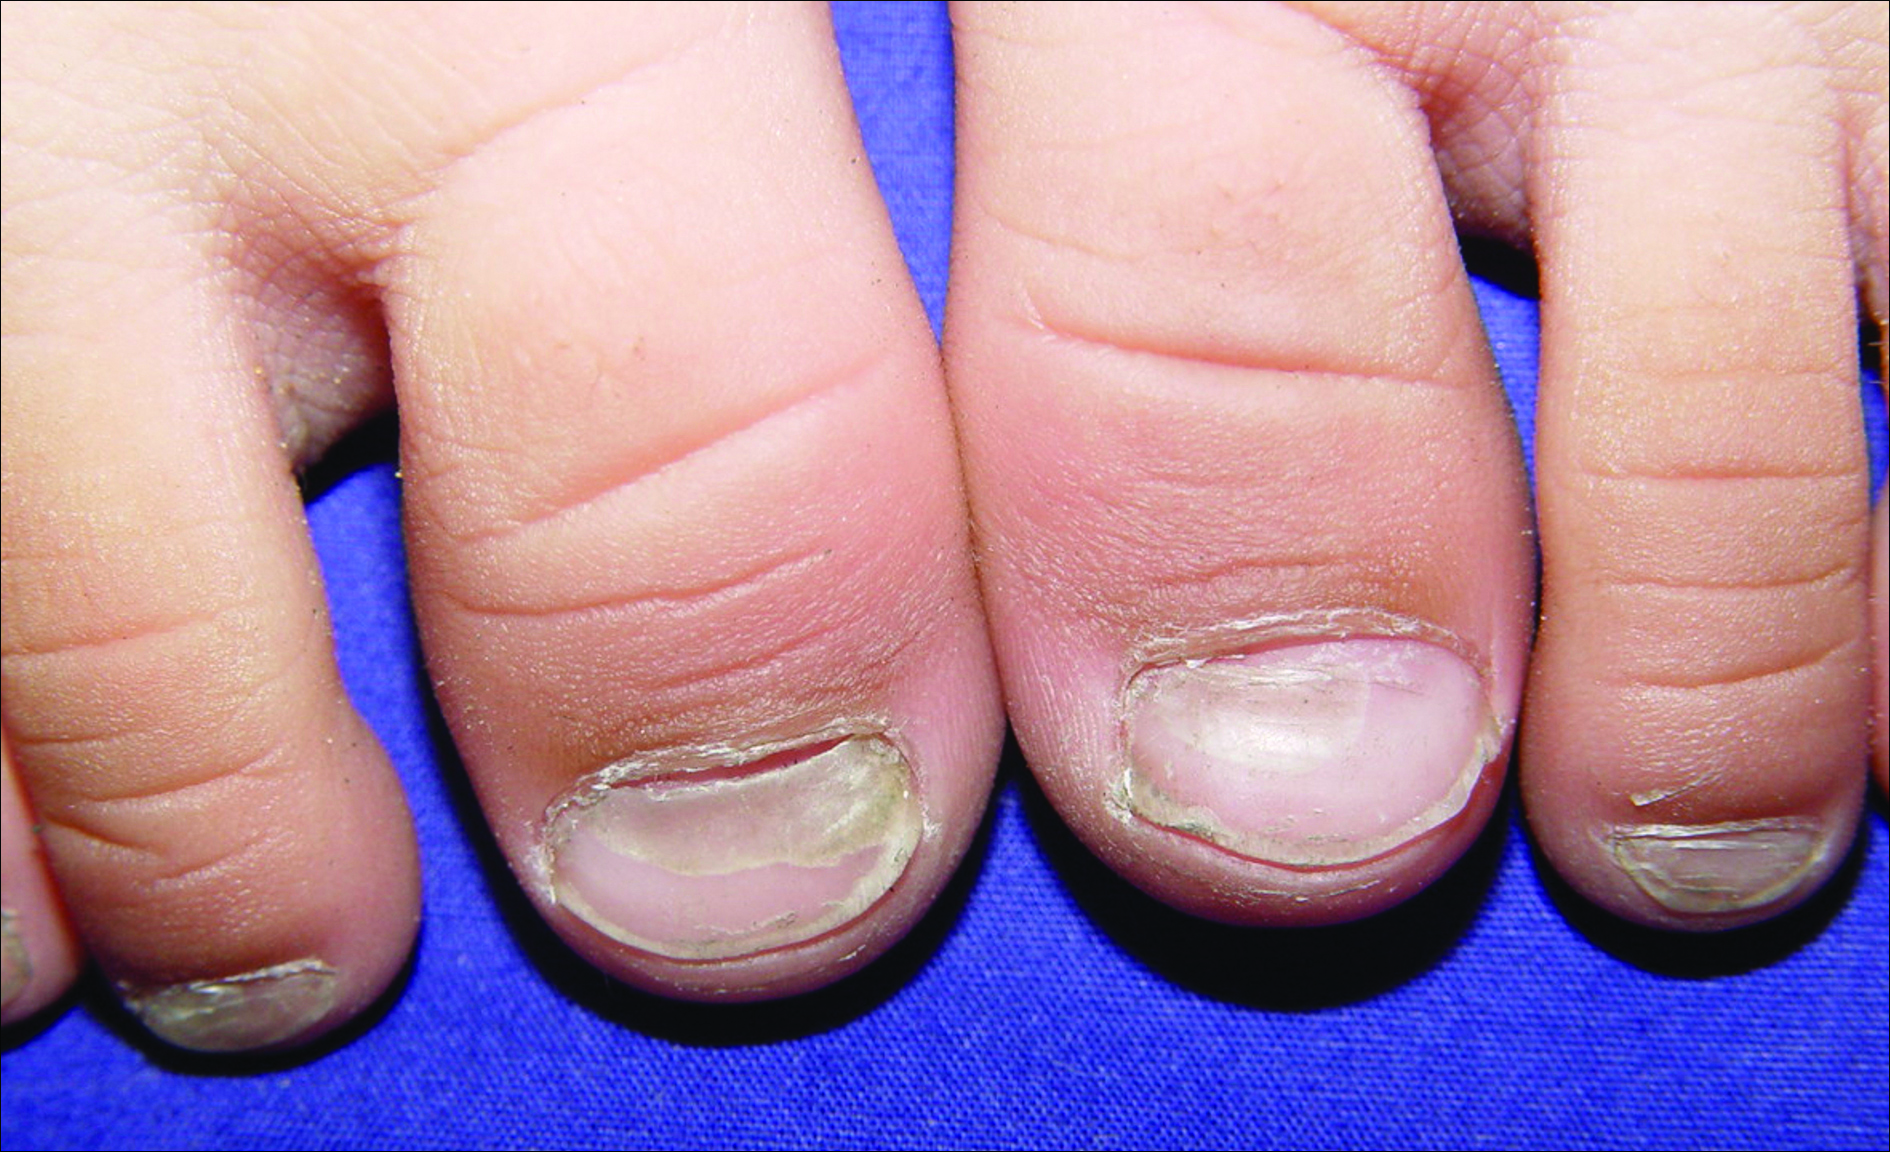 Onychomadesis Following Hand-foot-and-mouth Disease | Clinician Reviews